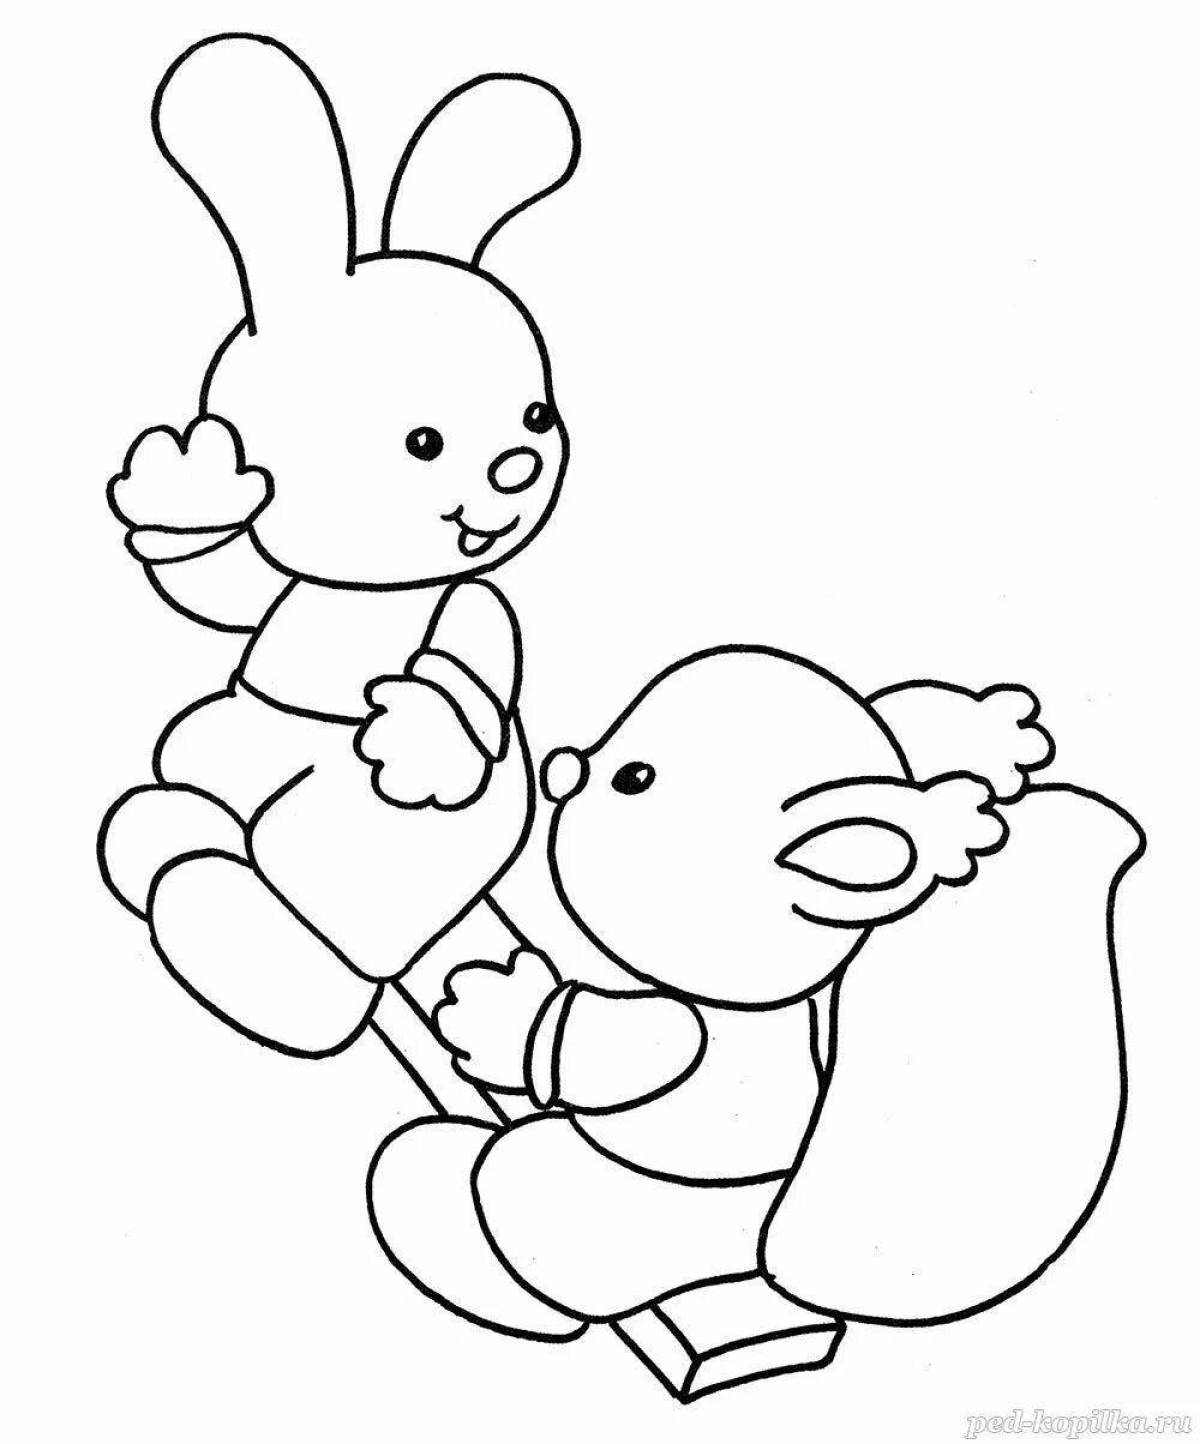 Adorable rabbit and squirrel coloring book